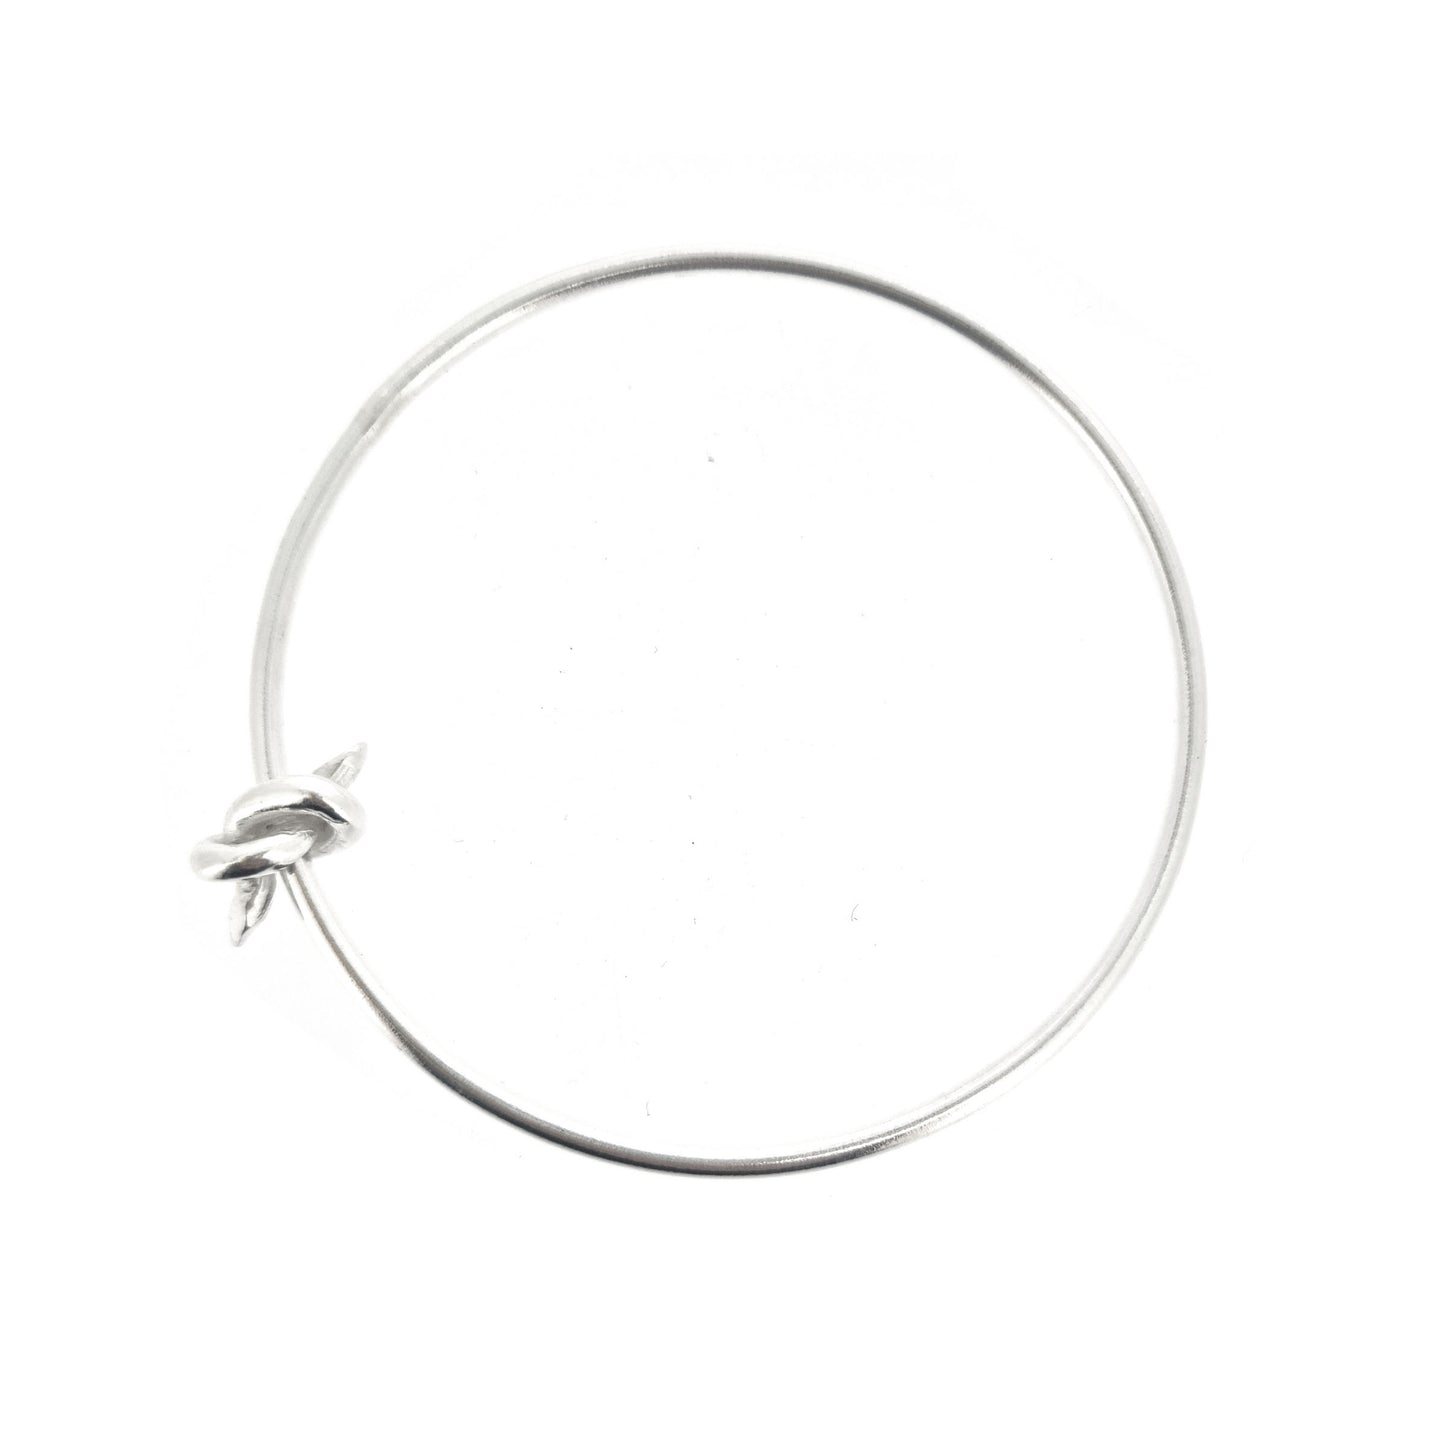 Silver round bangle with spinning knot charm.